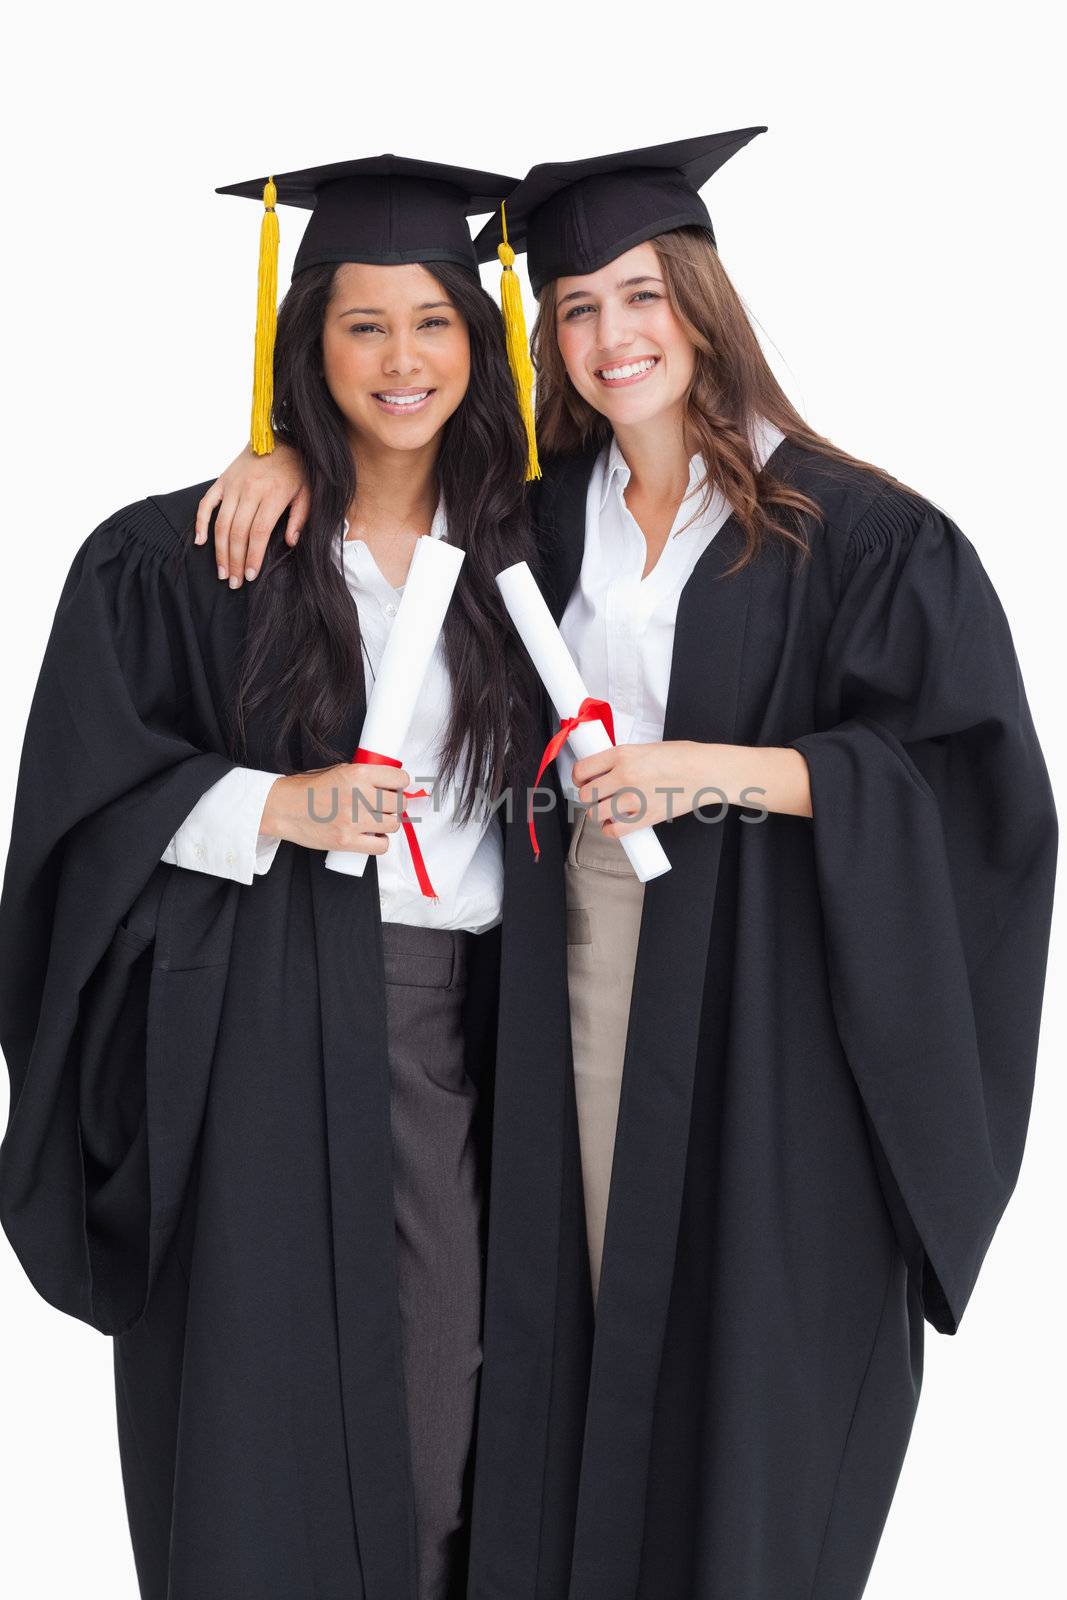 Two women embracing each other after they graduated from univers by Wavebreakmedia